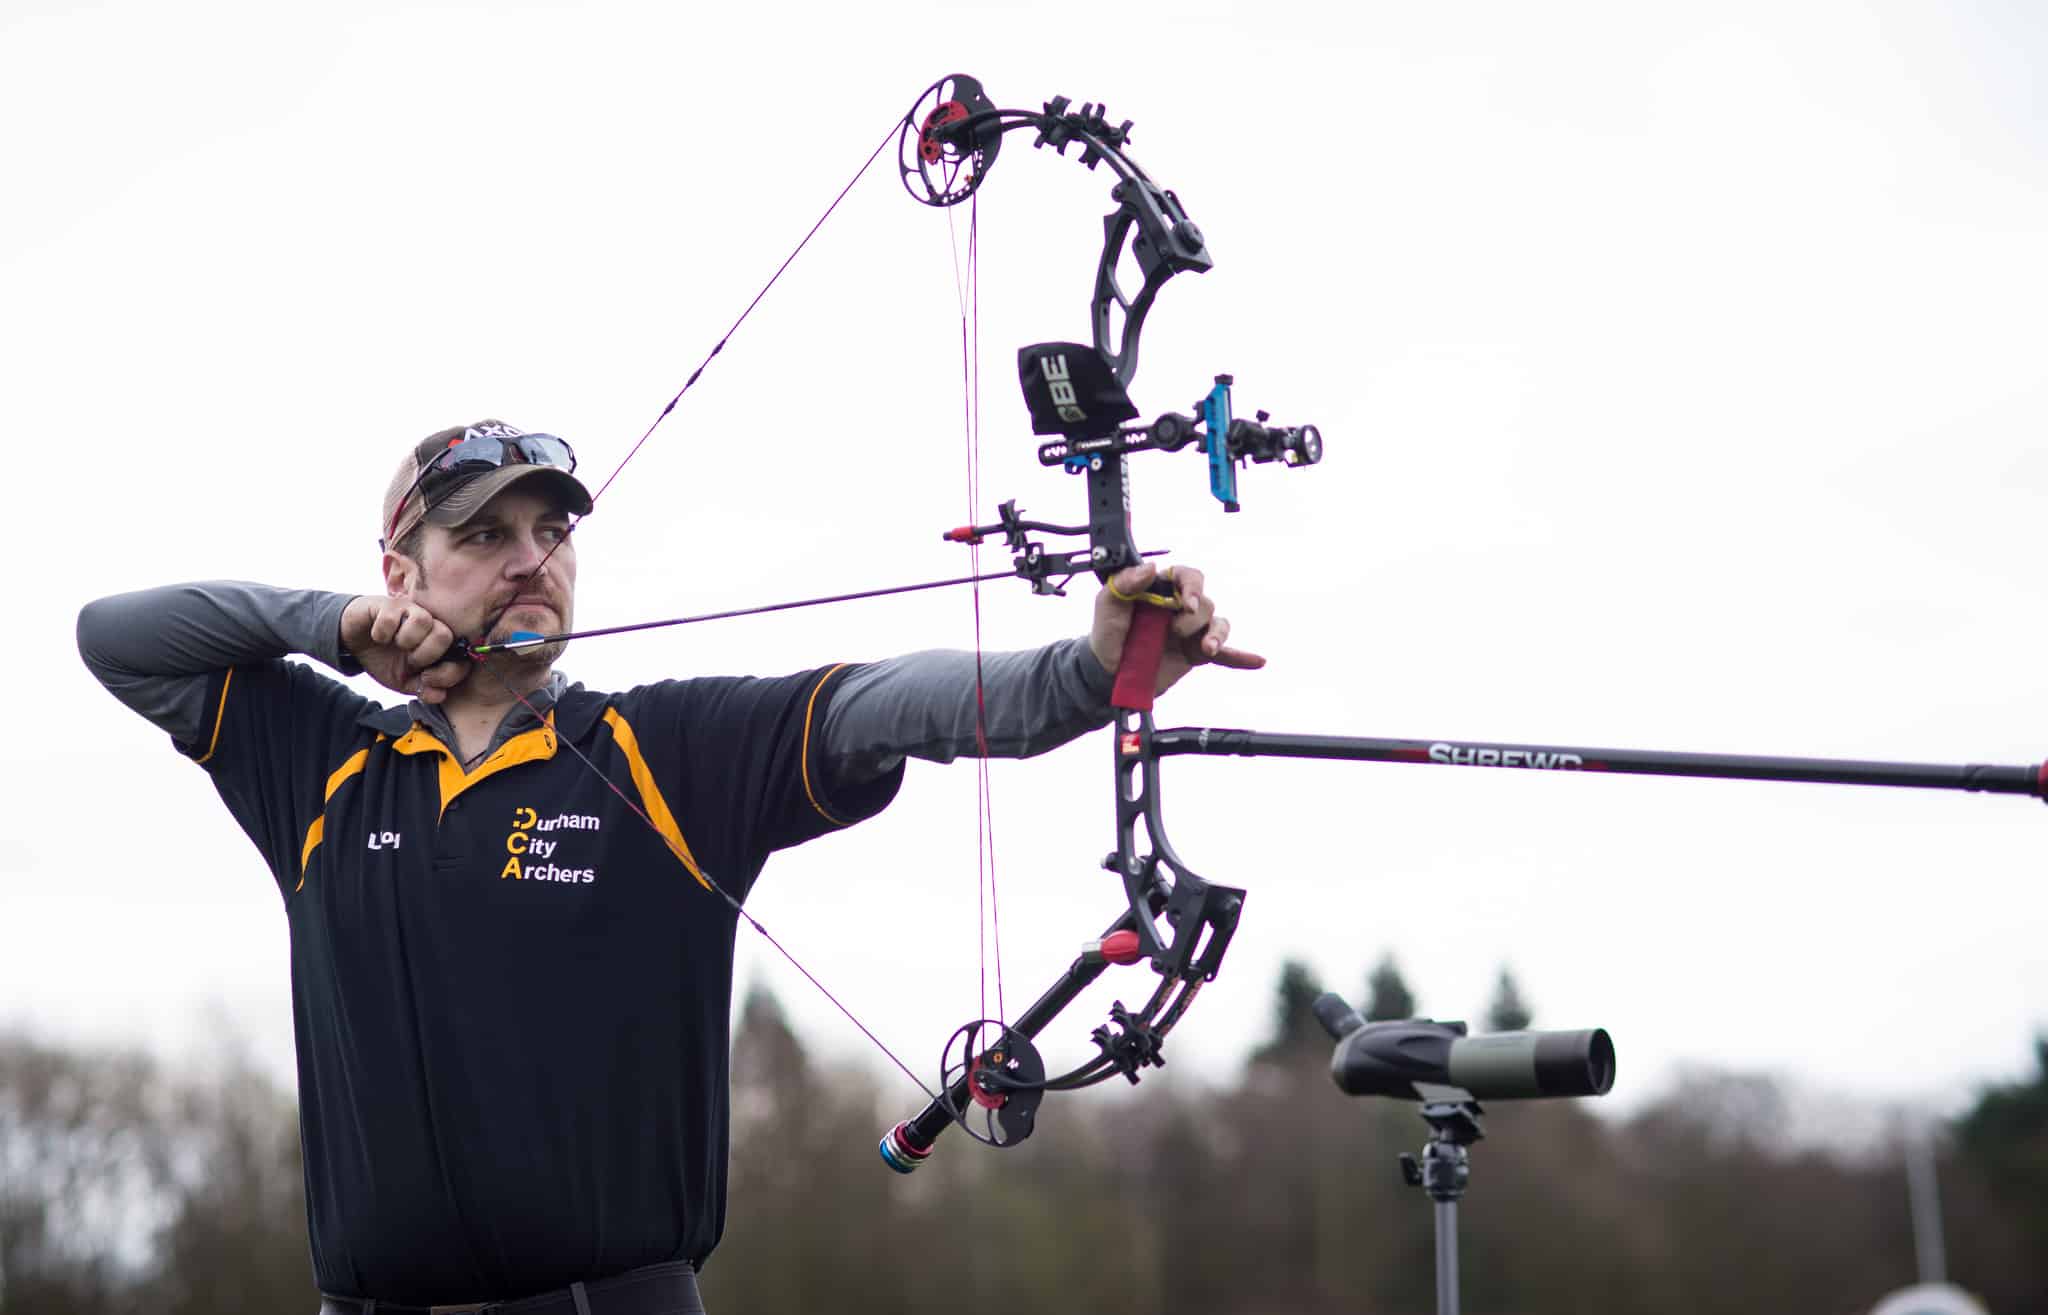 How To Shoot A Compound Bow And Arrow Better Properly And Accurately